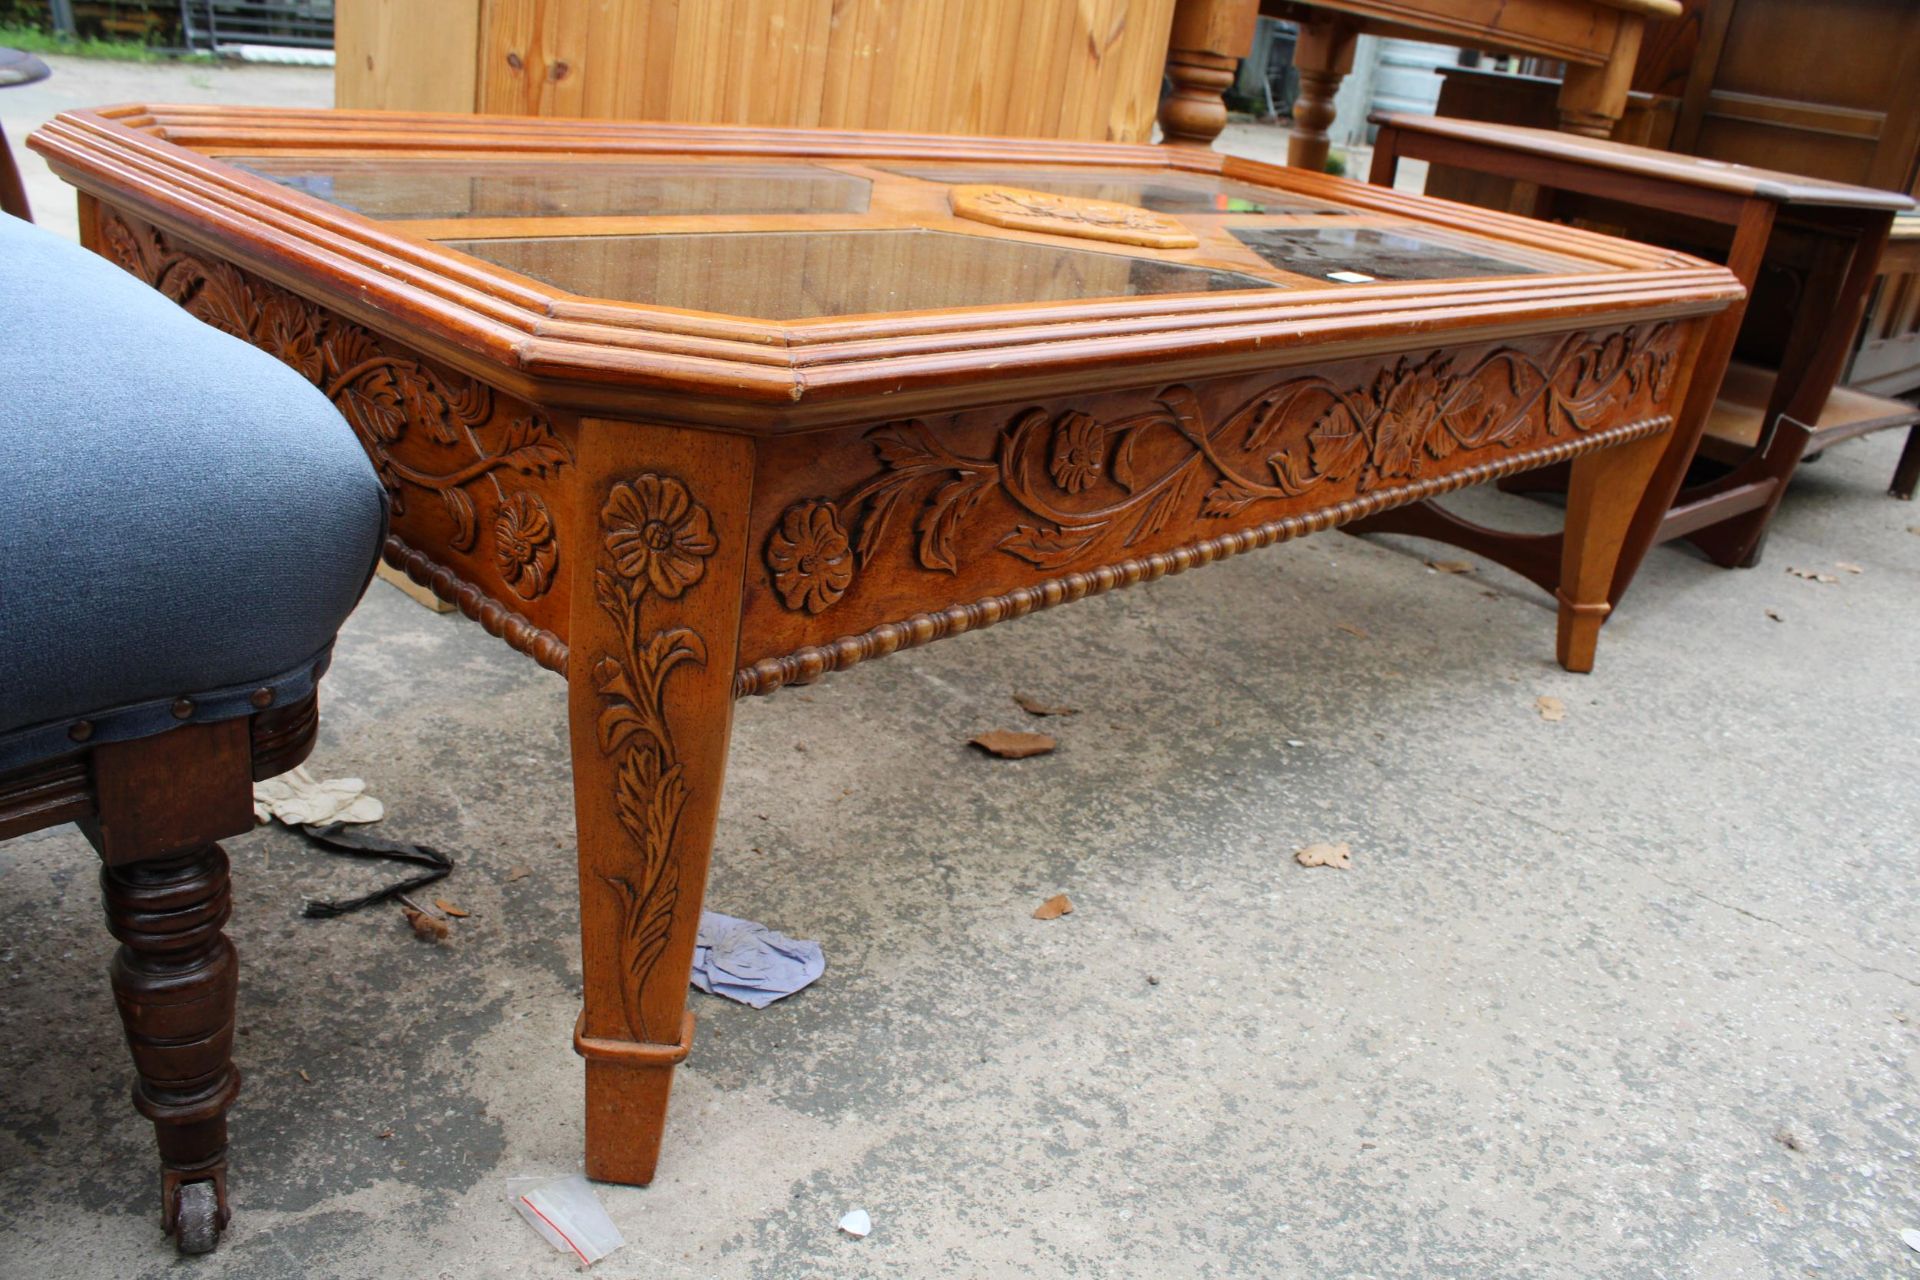 A MODERN OAK AND HARDWOOD COFFEE TABLE WITH INSET GLASS AND CARVED TOP, 52" X 28" - Image 2 of 3